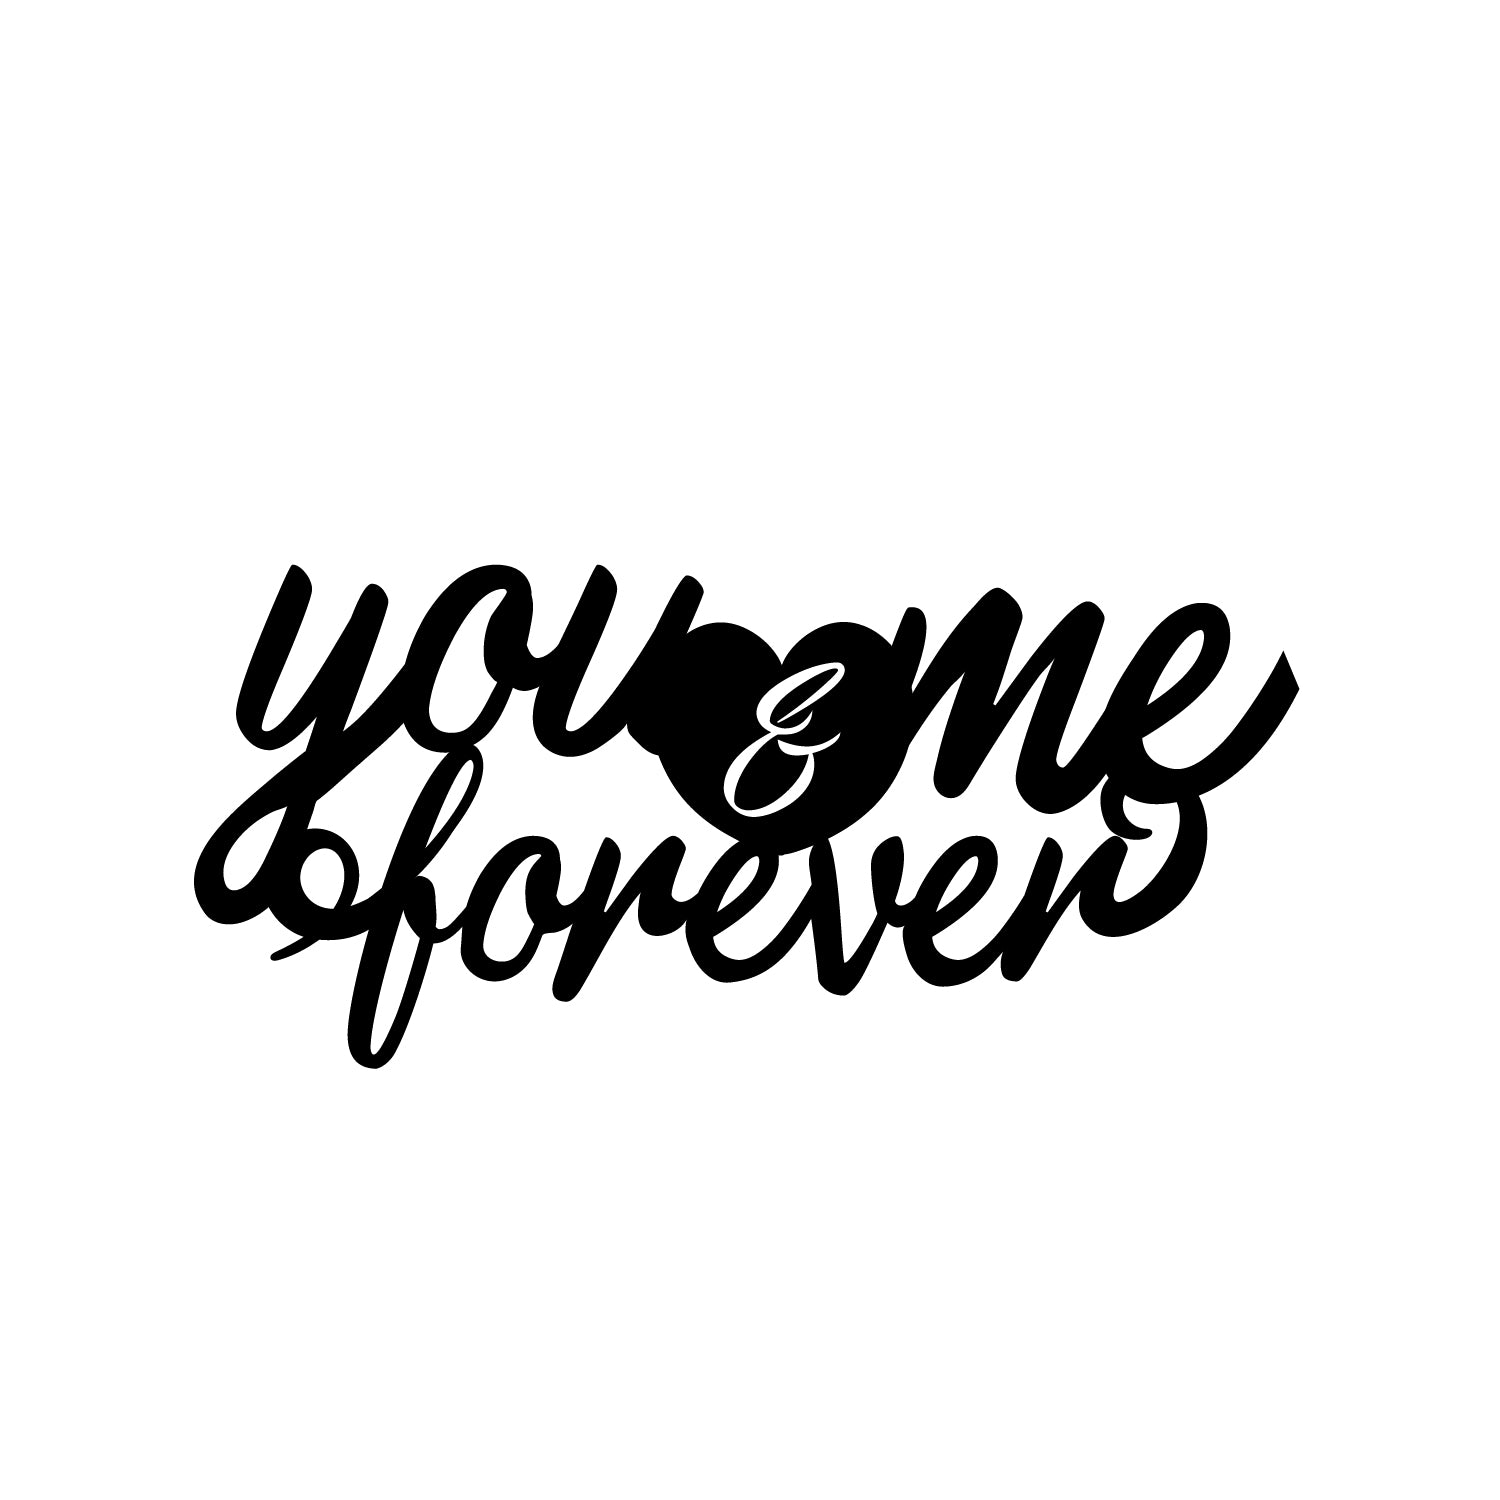 "You & Me Forever" Love Theme Black Engineered Wood Wall Art Cutout, Ready to Hang Home Decor 2